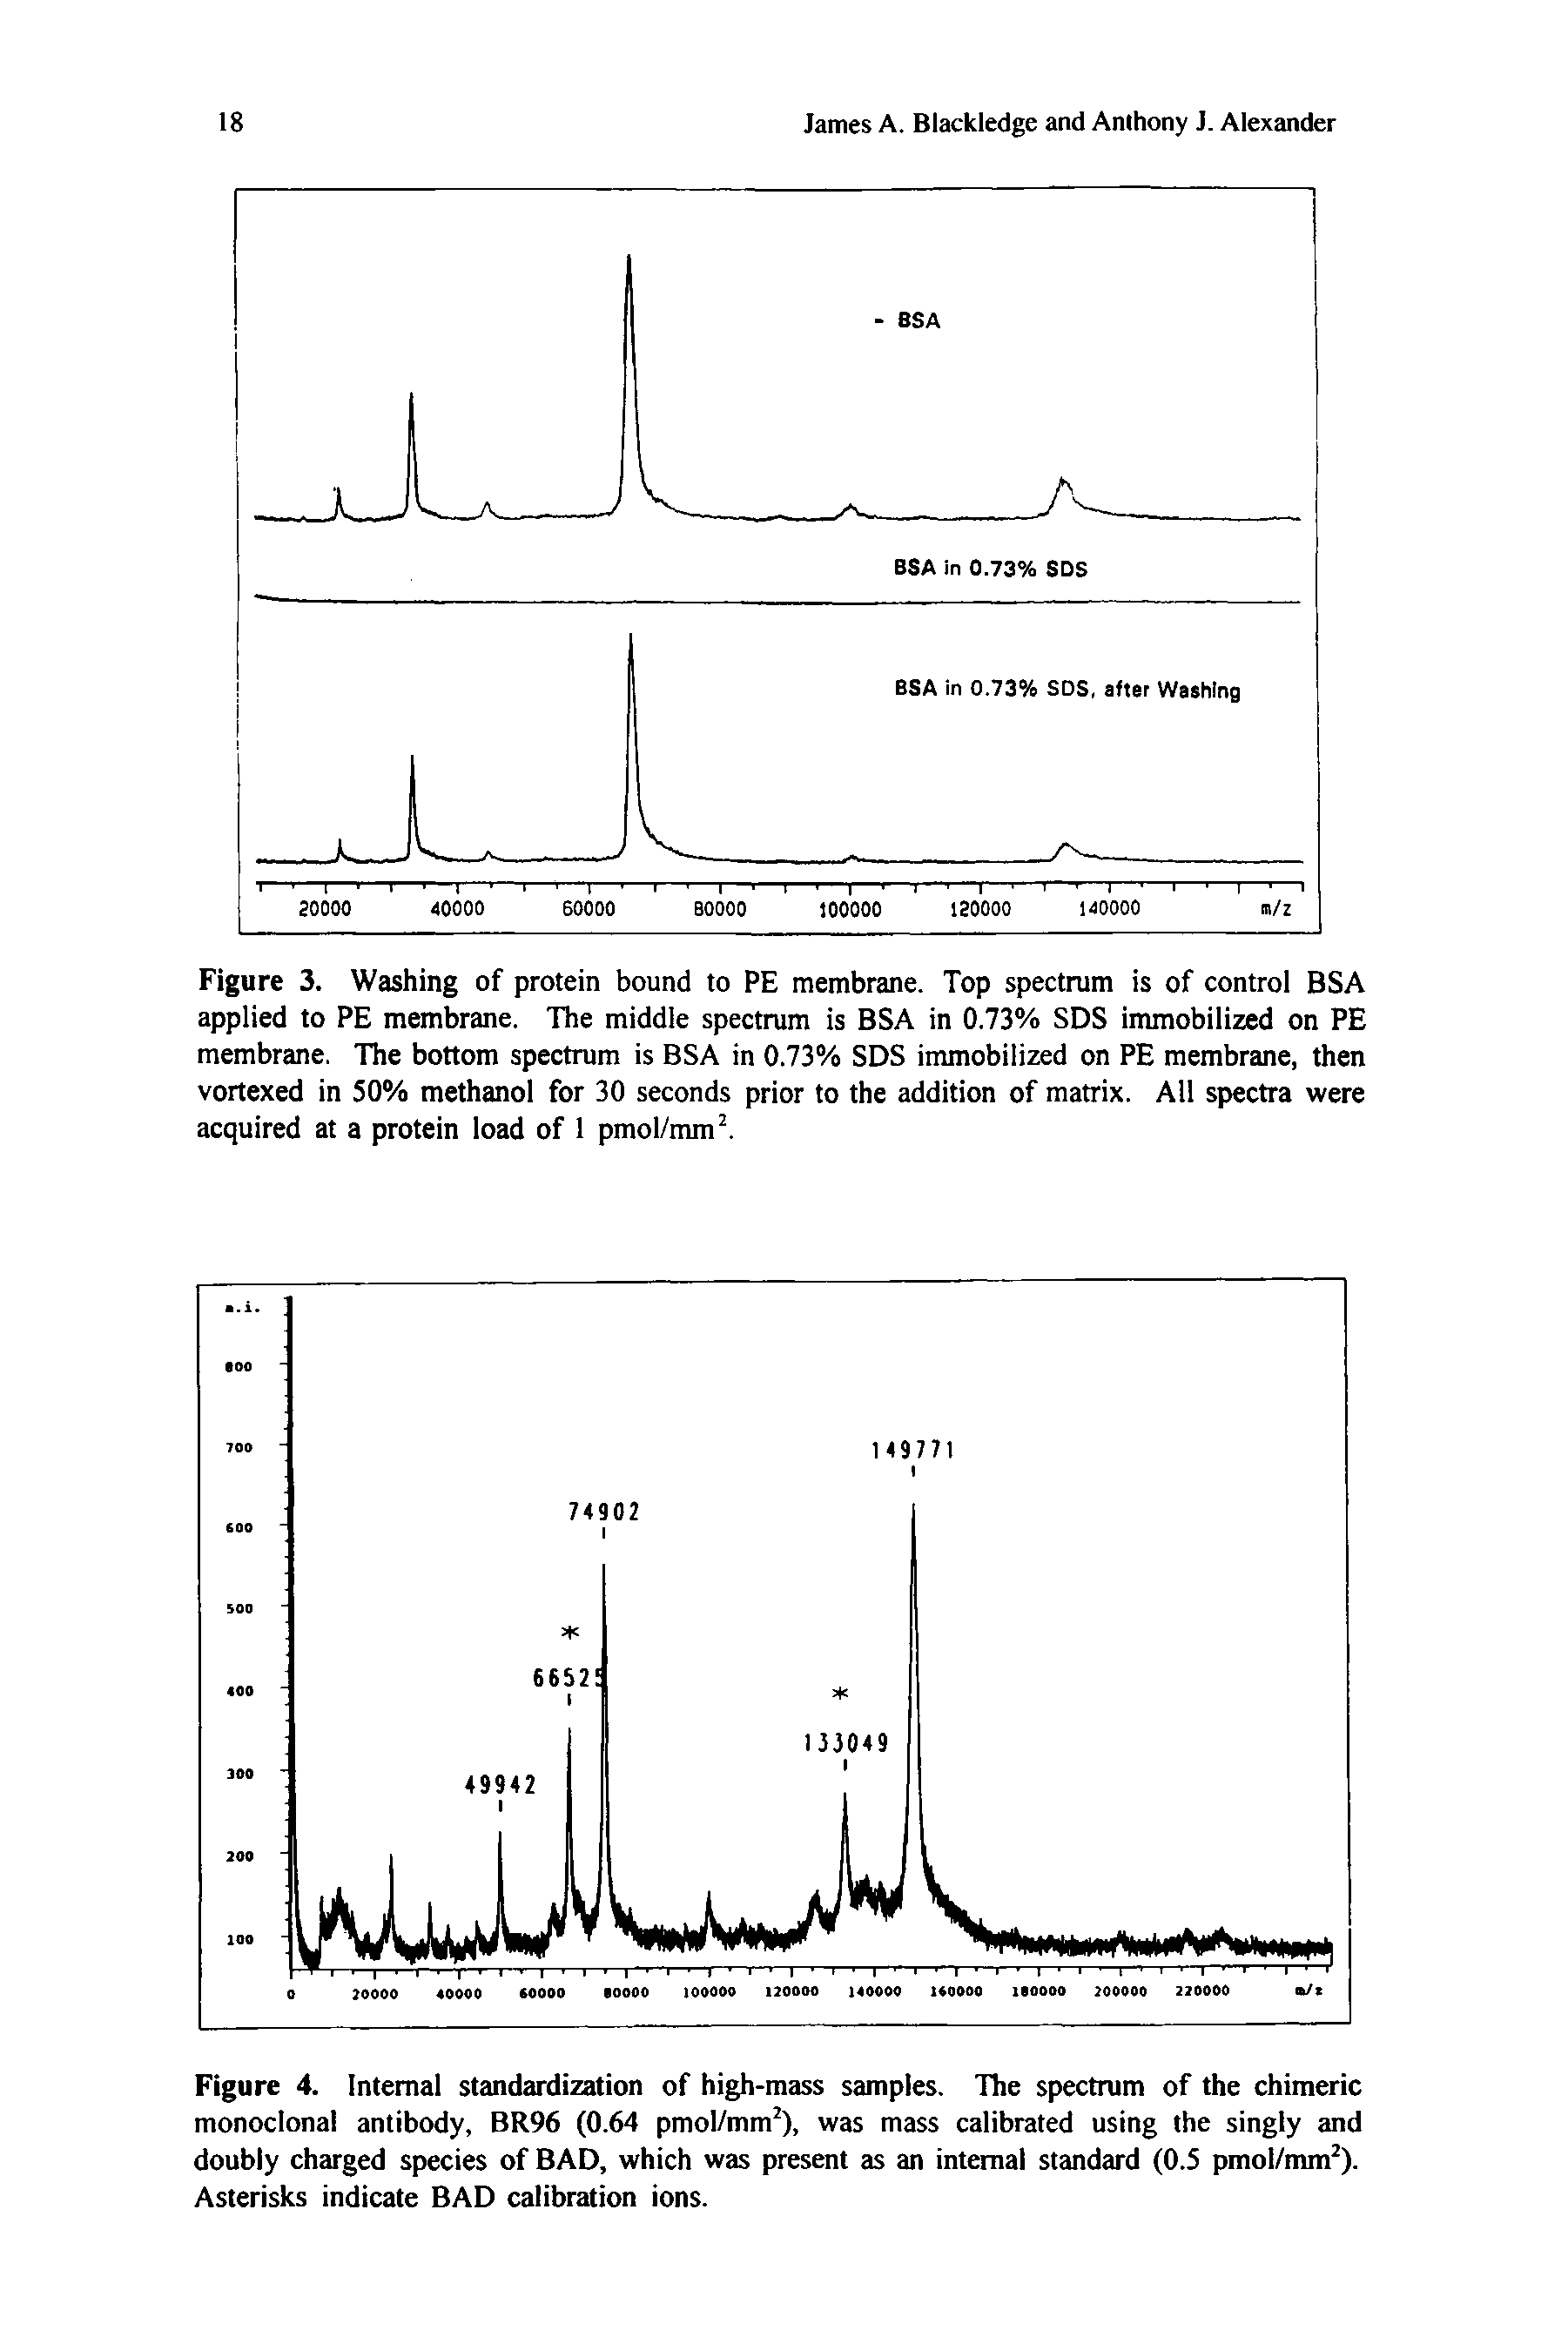 Figure 4. Internal standardization of high-mass samples. The spectrum of the chimeric monoclonal antibody, BR96 (0.64 pmol/mm ), was mass calibrated using the singly and doubly charged species of BAD, which was present as an internal standard (0.5 pmol/mm ). Asterisks indicate BAD calibration ions.